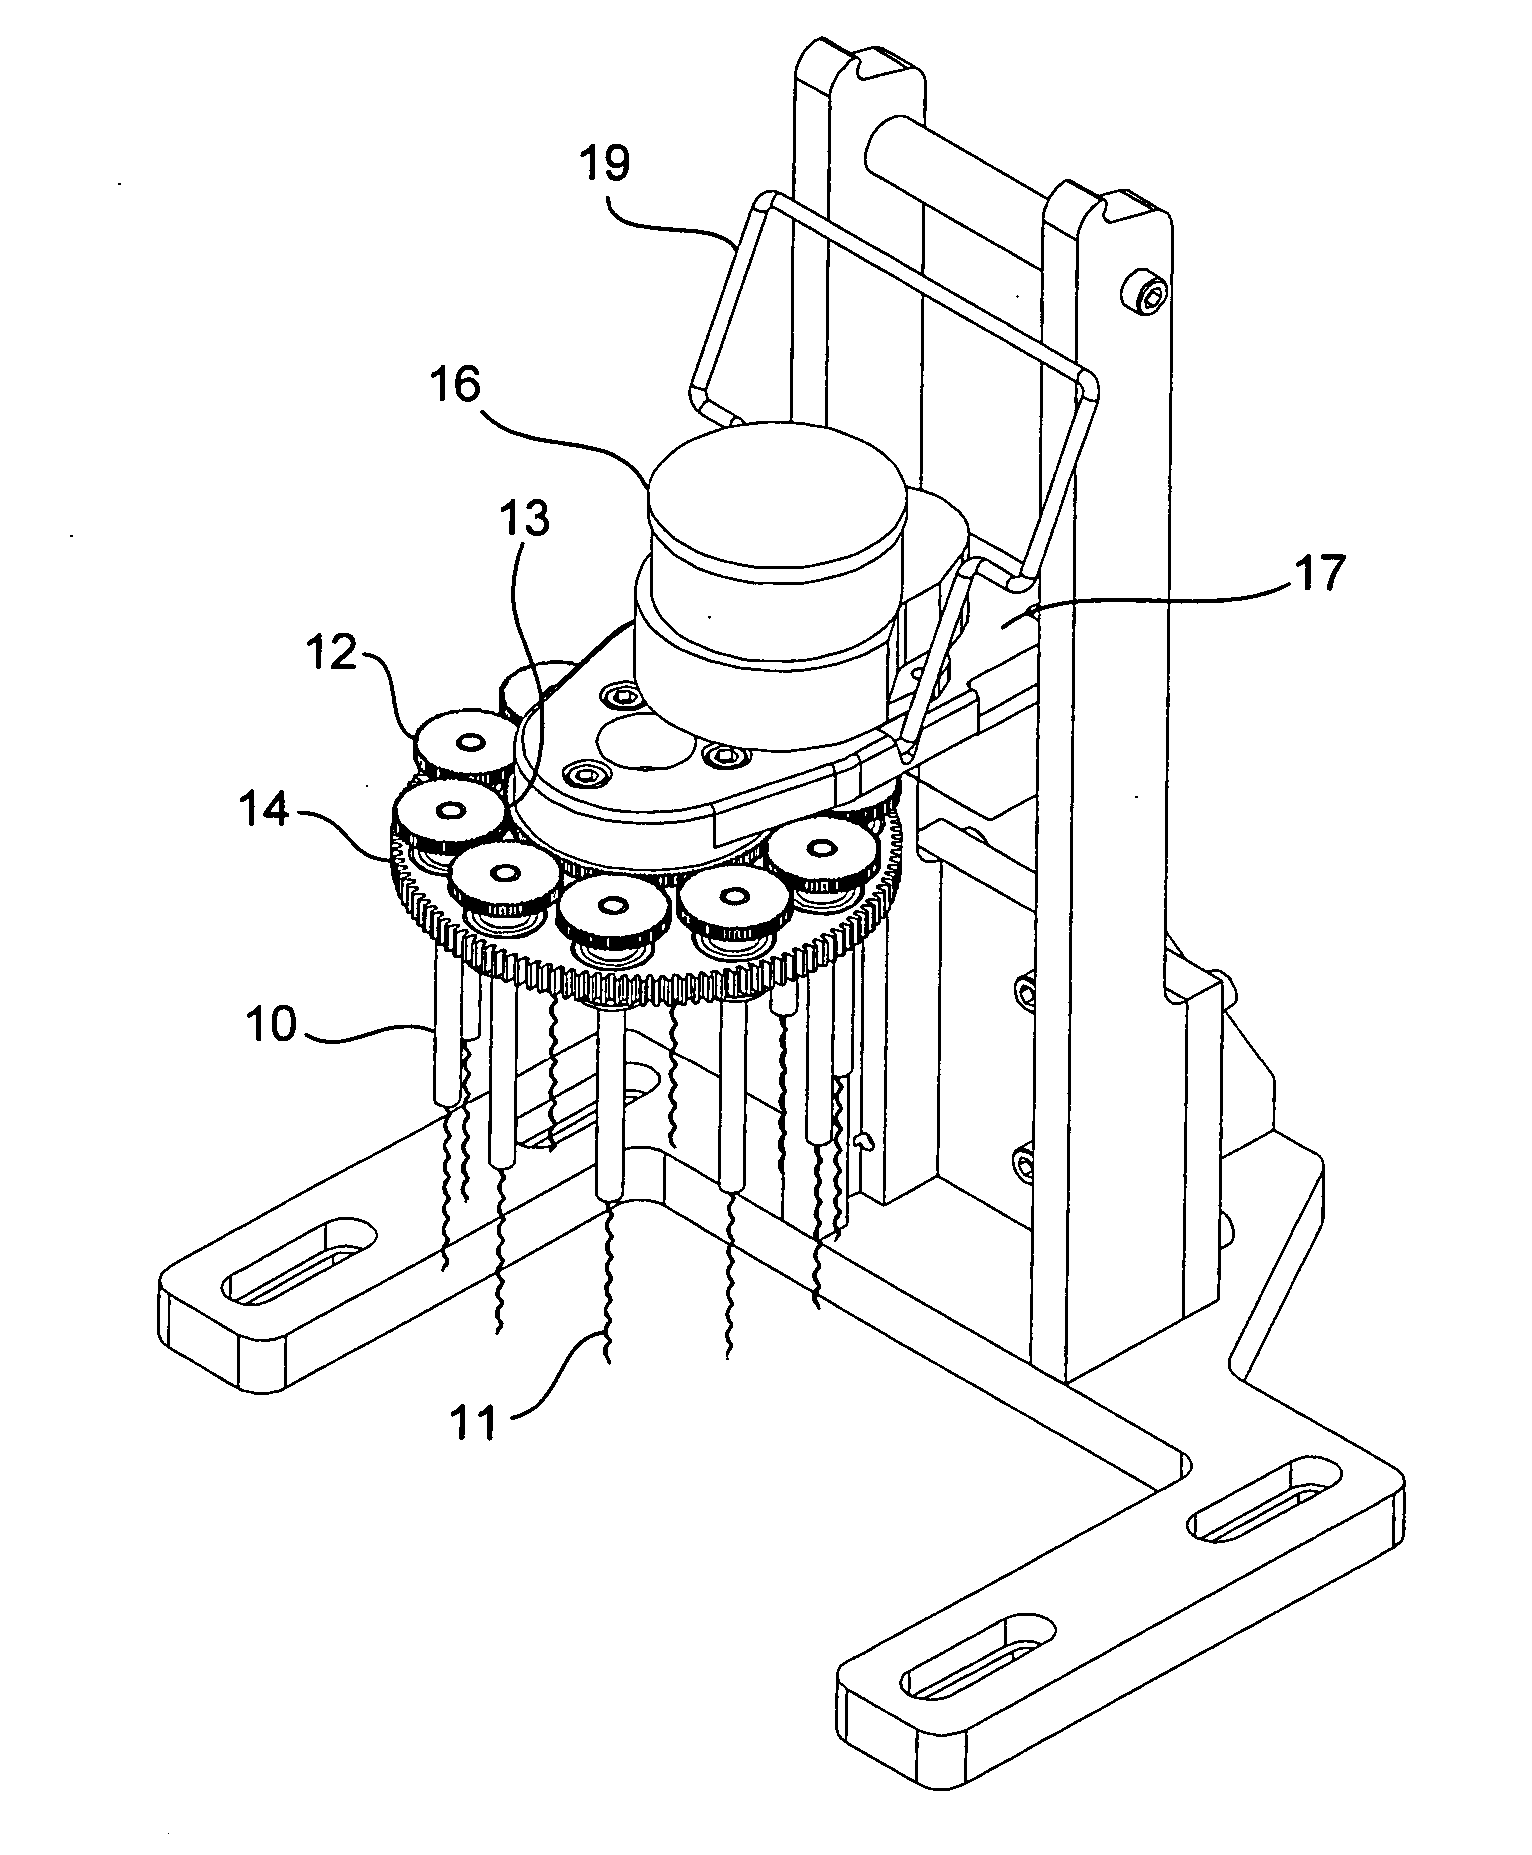 Method and apparatus for electropolishing metallic stents